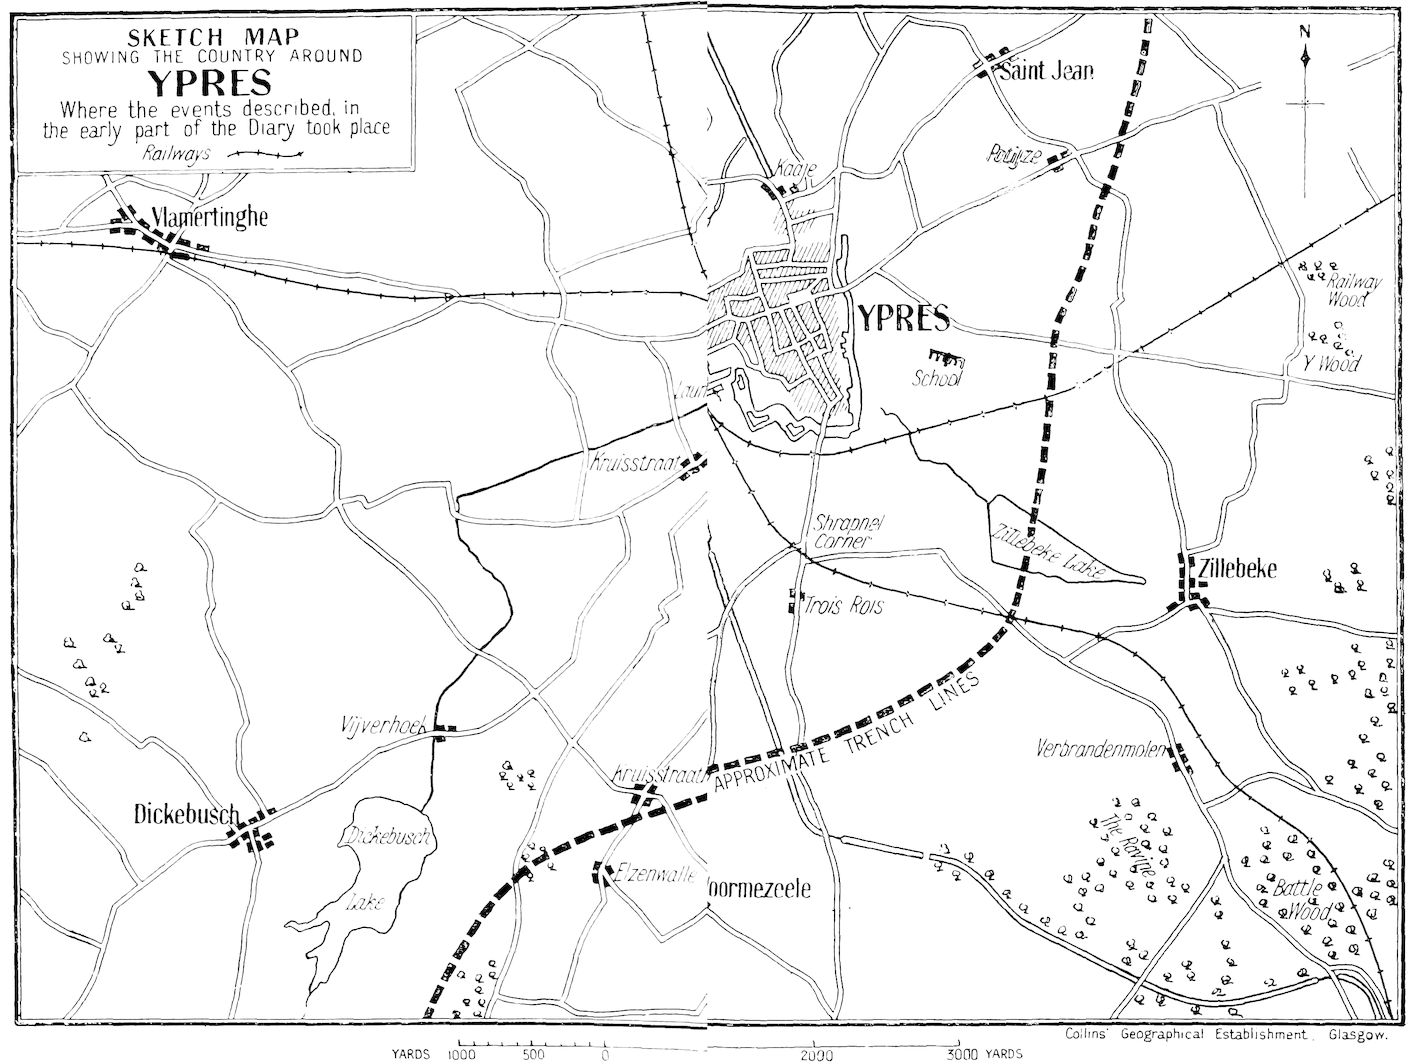 SKETCH MAP SHOWING THE COUNTRY AROUND YPRES Where the events described, in the early part of the Diary took place